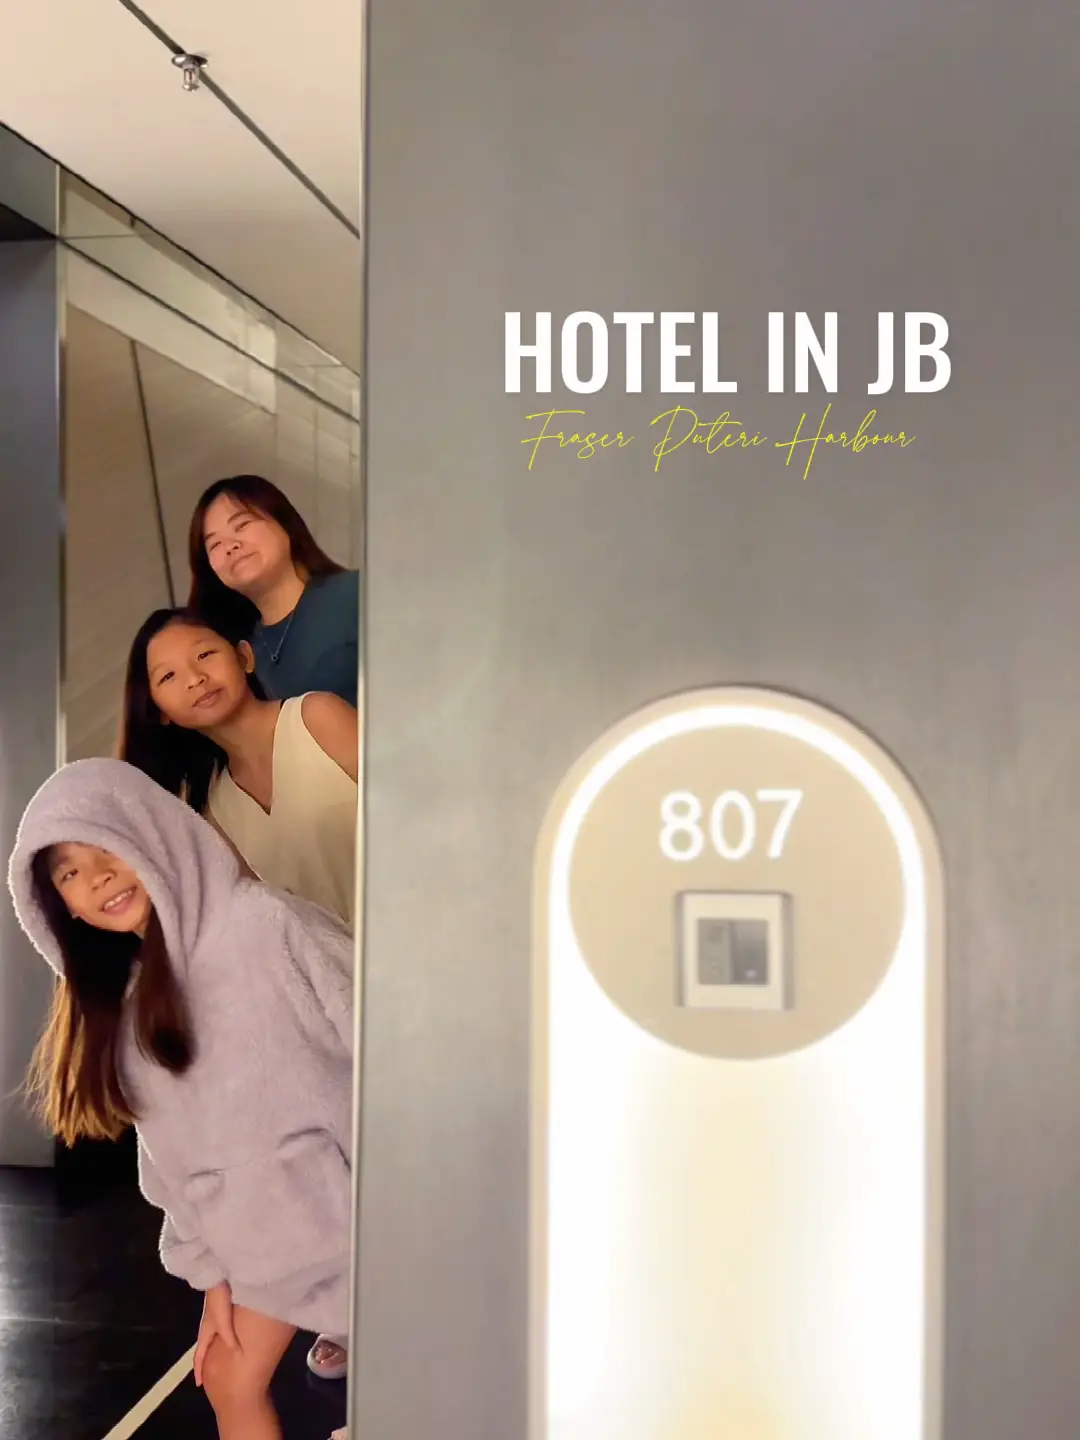 Save money when booking hotel in JB's images